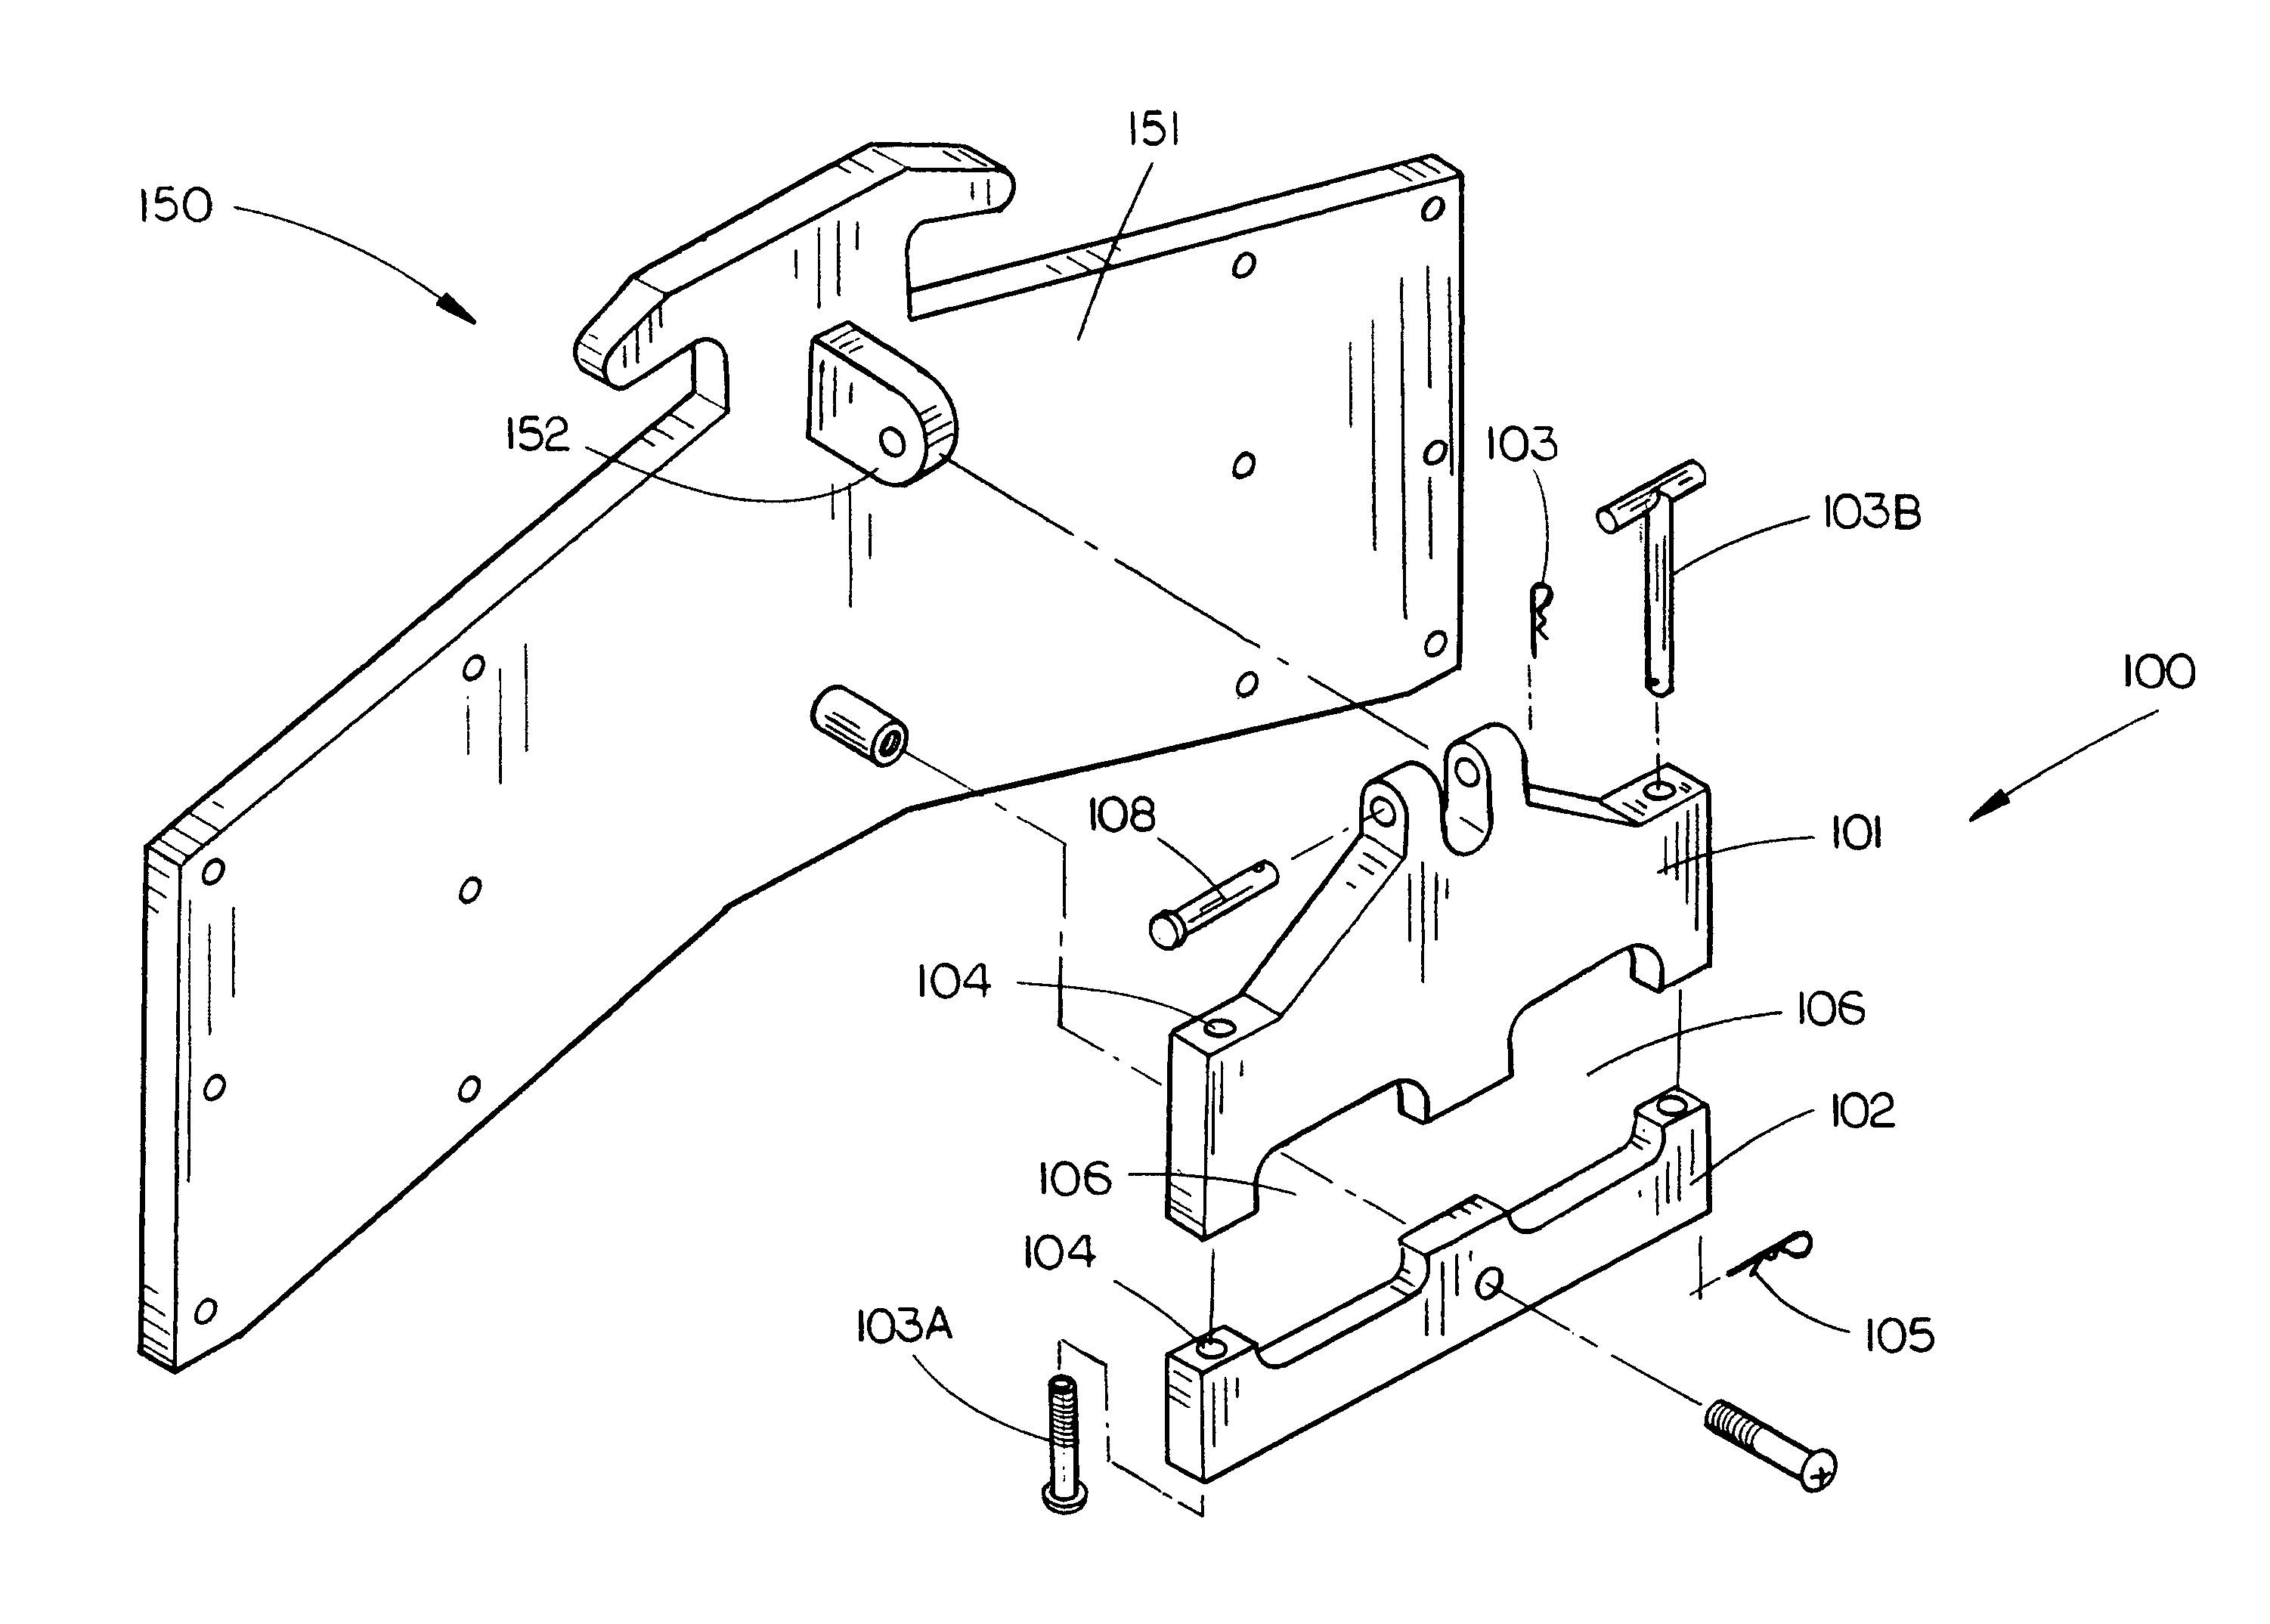 Cleat-mountable accessory apparatus